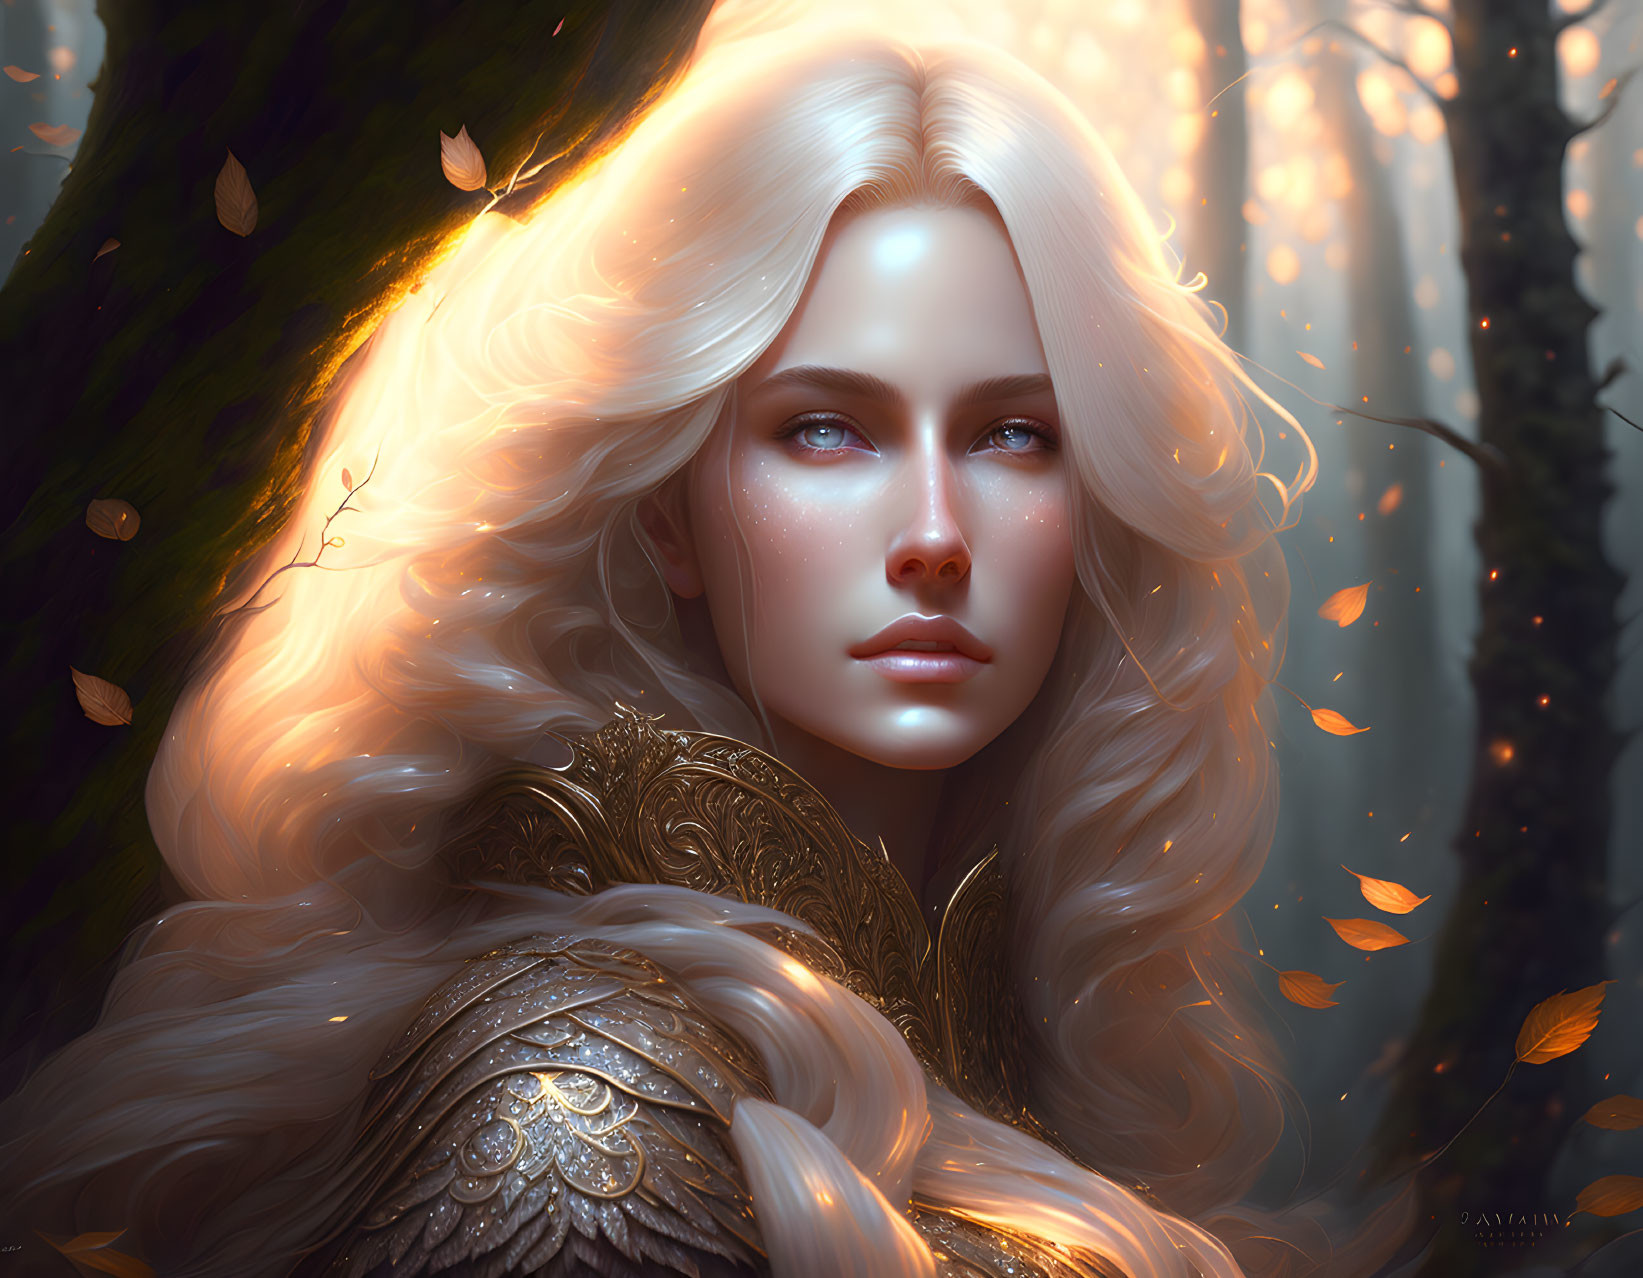 Fantasy portrait of woman with platinum blonde hair in gold armor, set in autumn forest